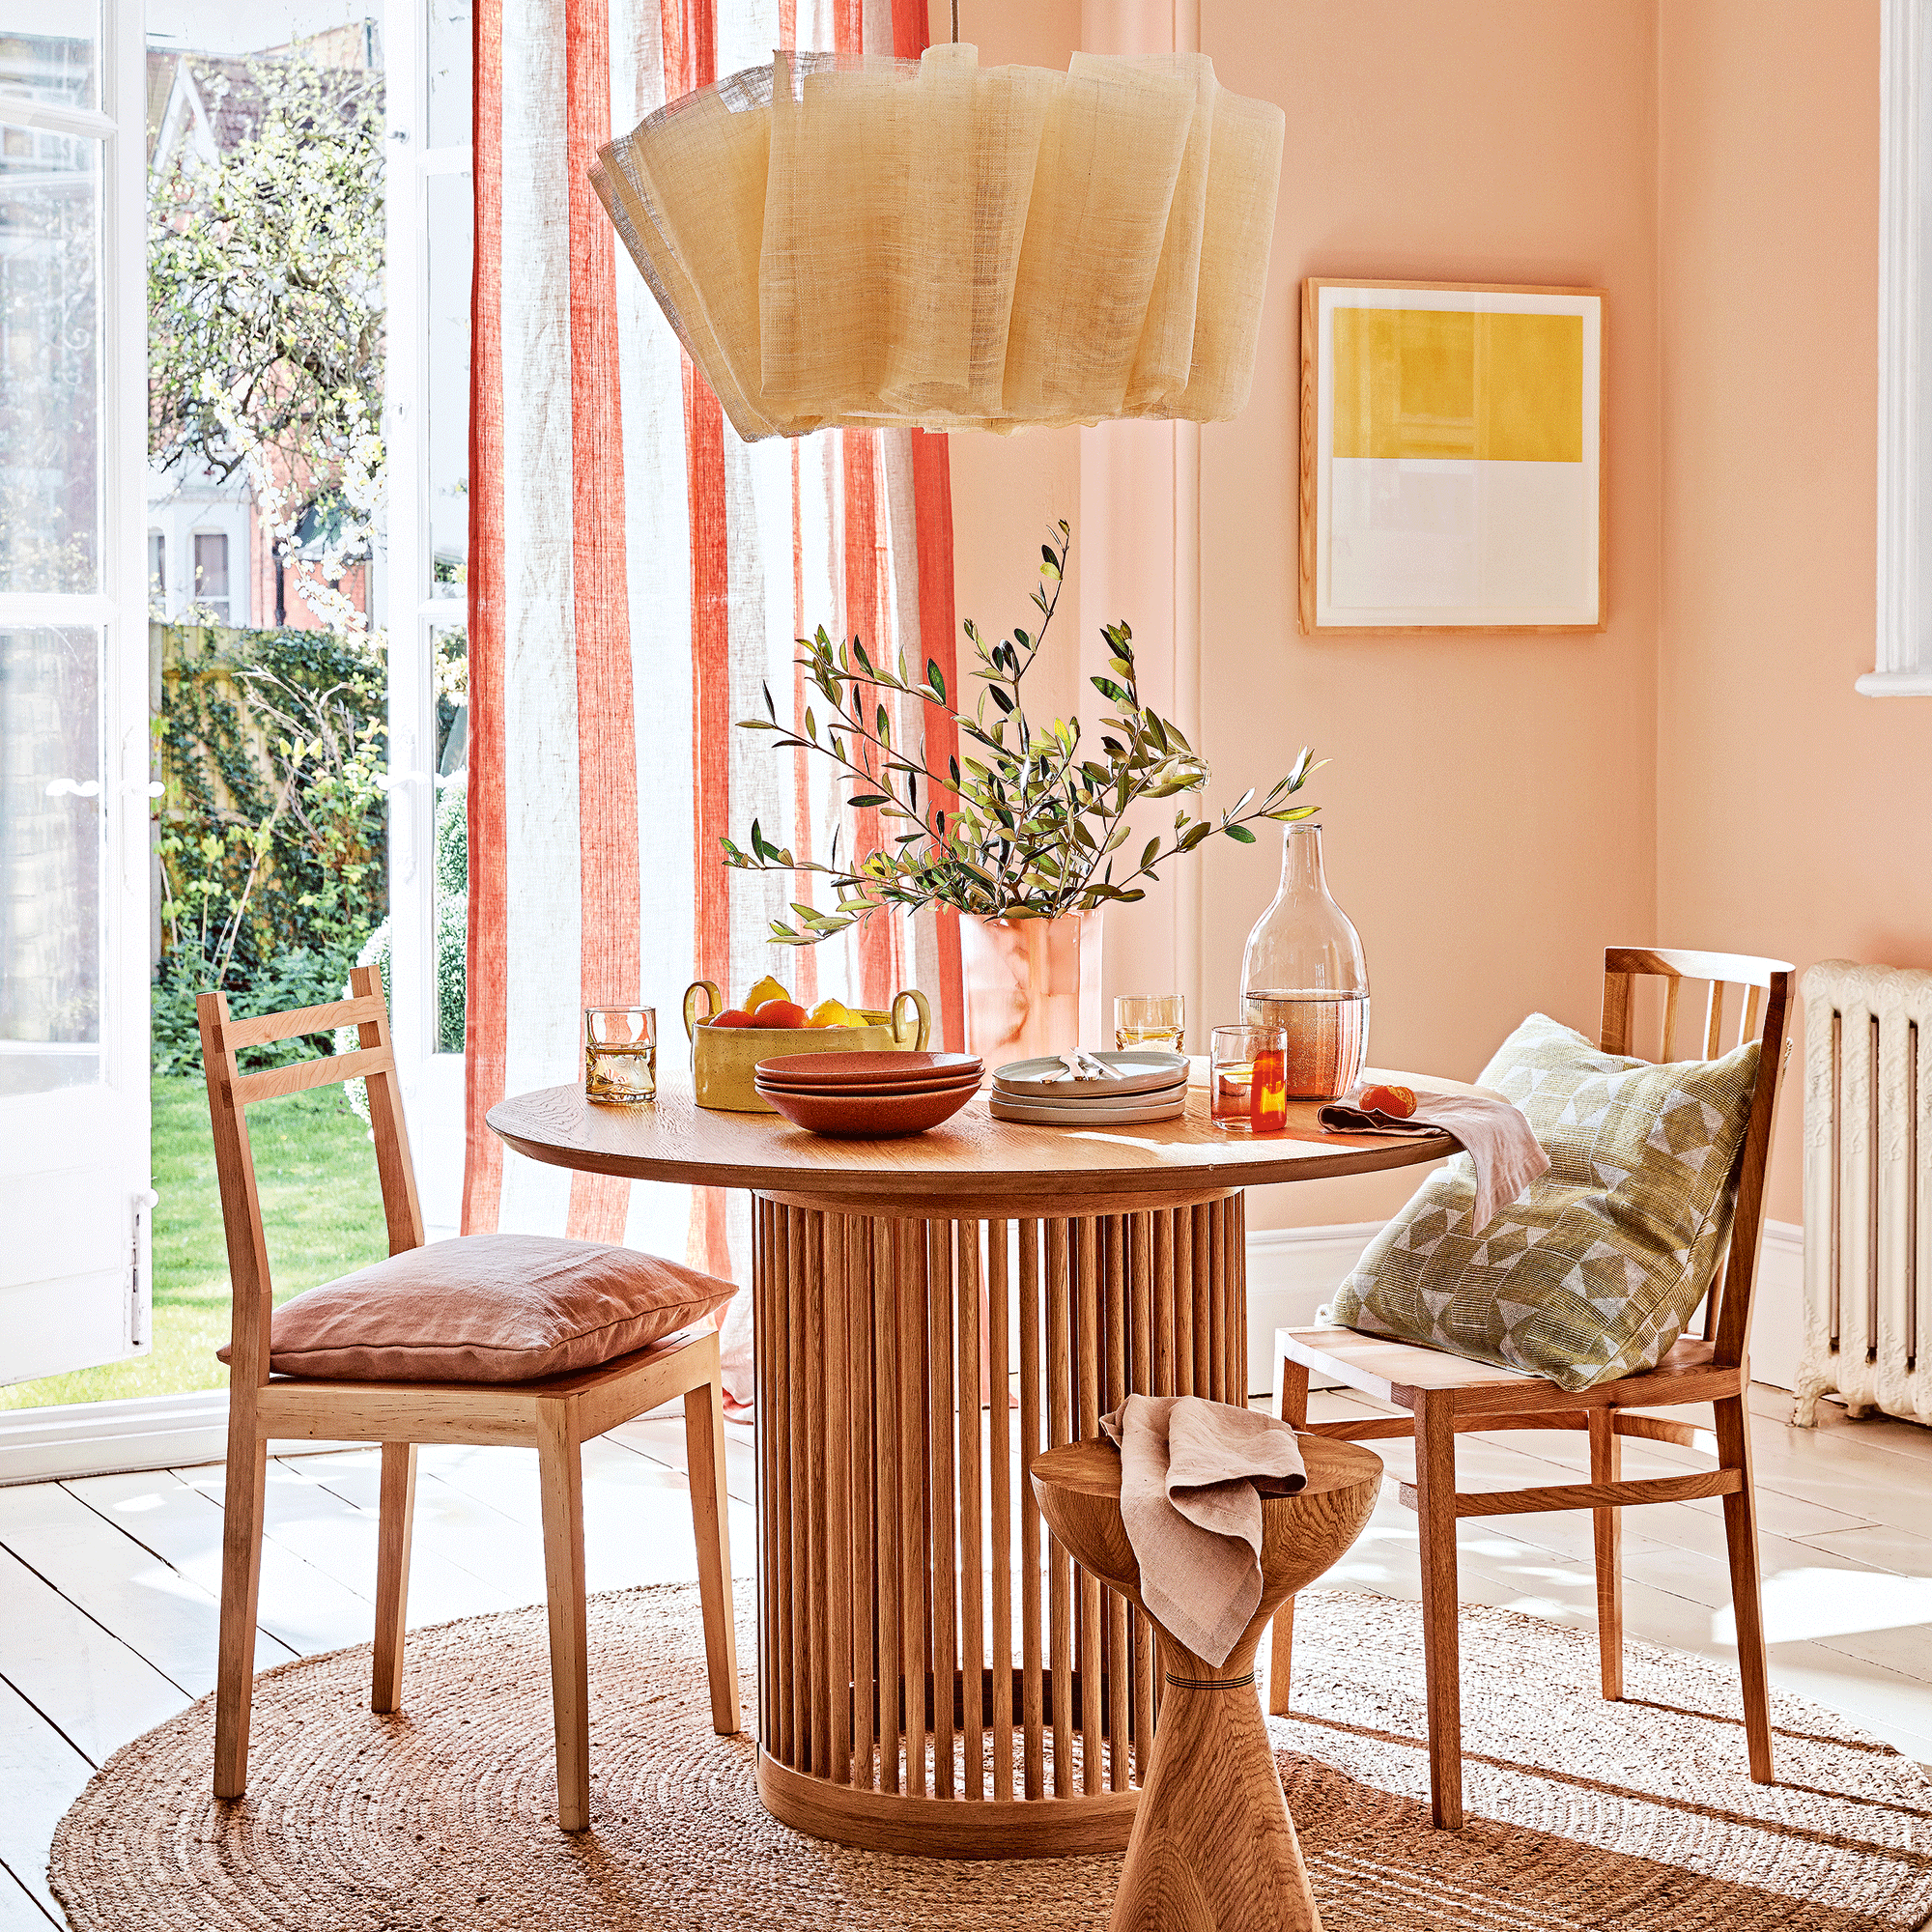 Pink dining room with wooden table and chairs